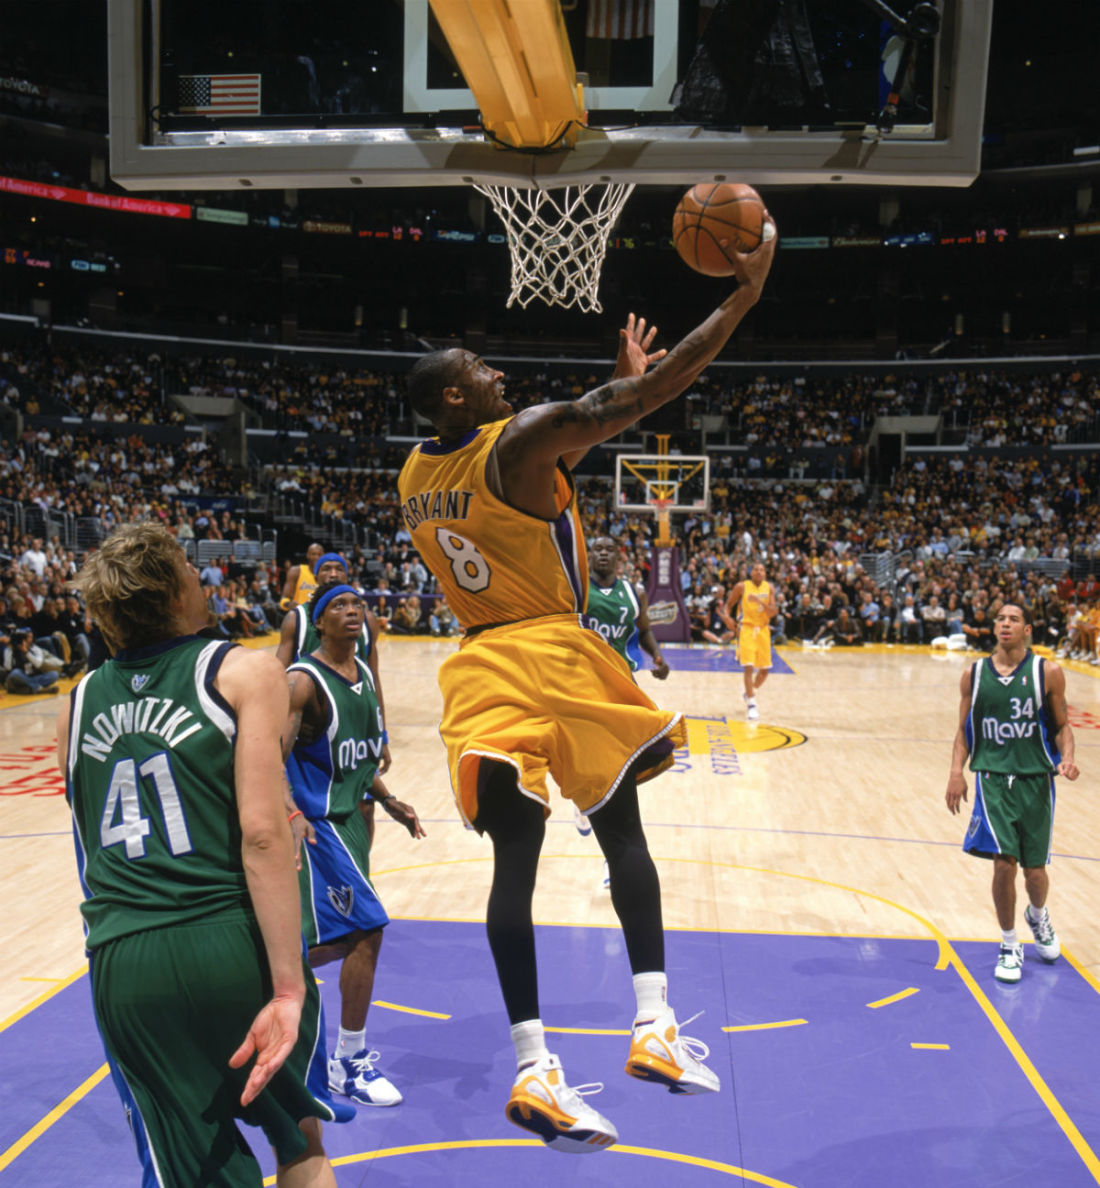 Kobe Bryant Best Games Jersey Number 8 & 24 | Sole Collector1100 x 1188